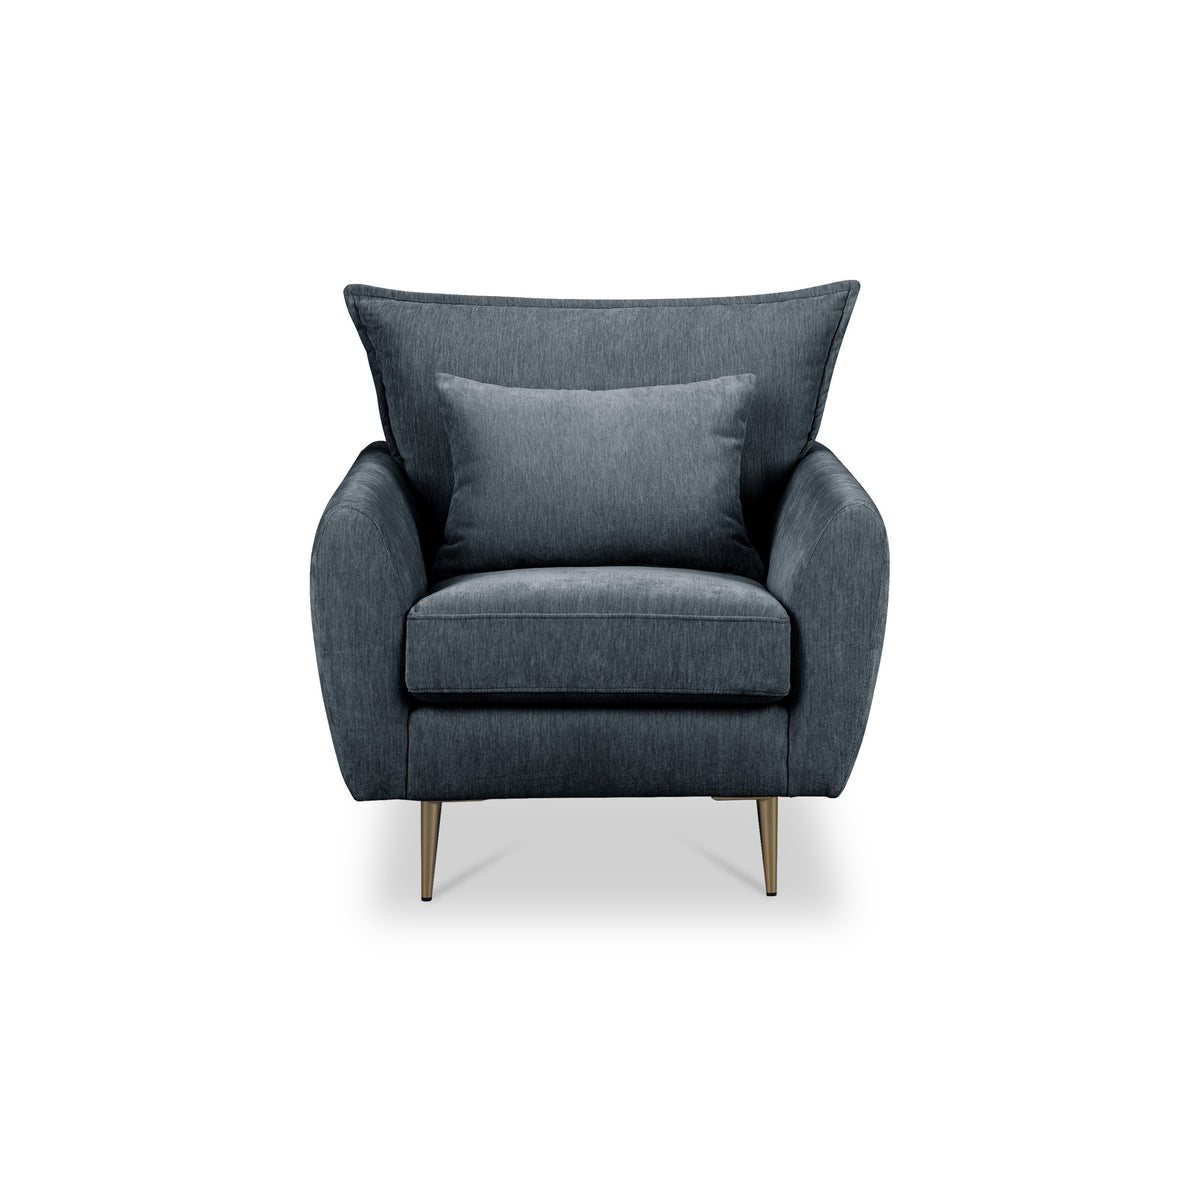 Evelyn Charcoal Grey Armchair from Roseland Furniture